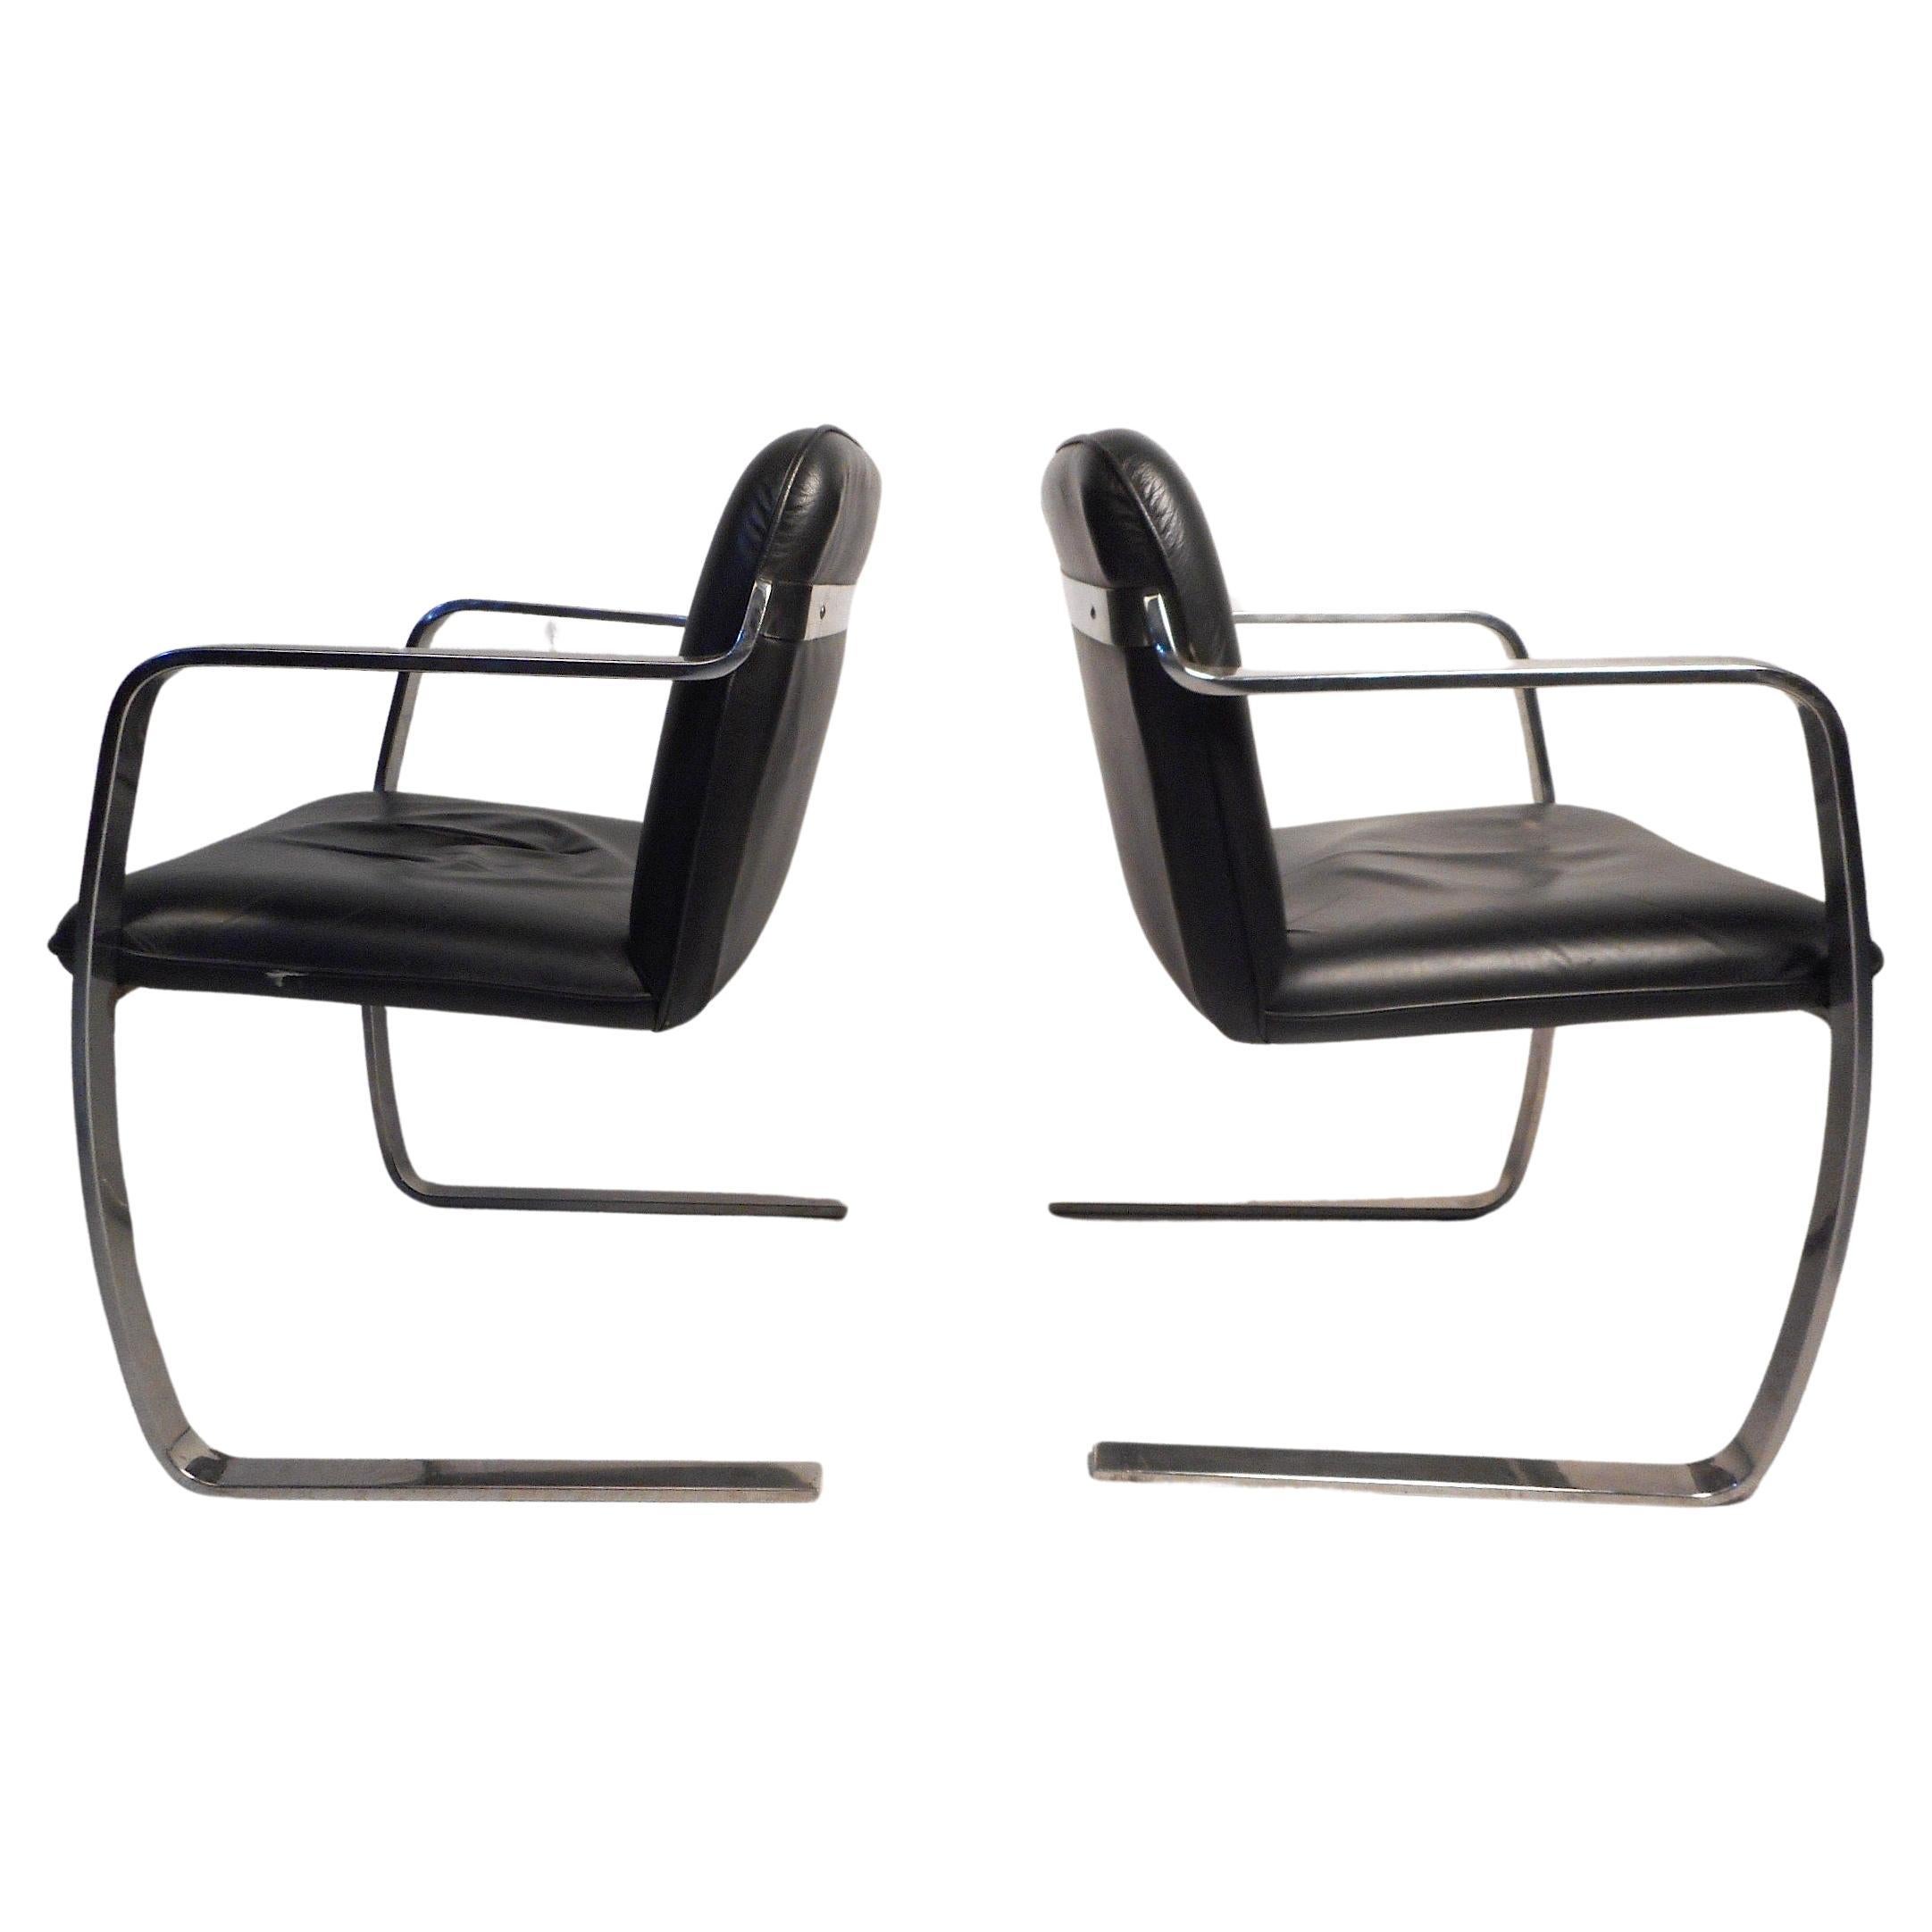 Pair of Midcentury Cantilever Brno Style Chairs by Cumberland Furniture For Sale